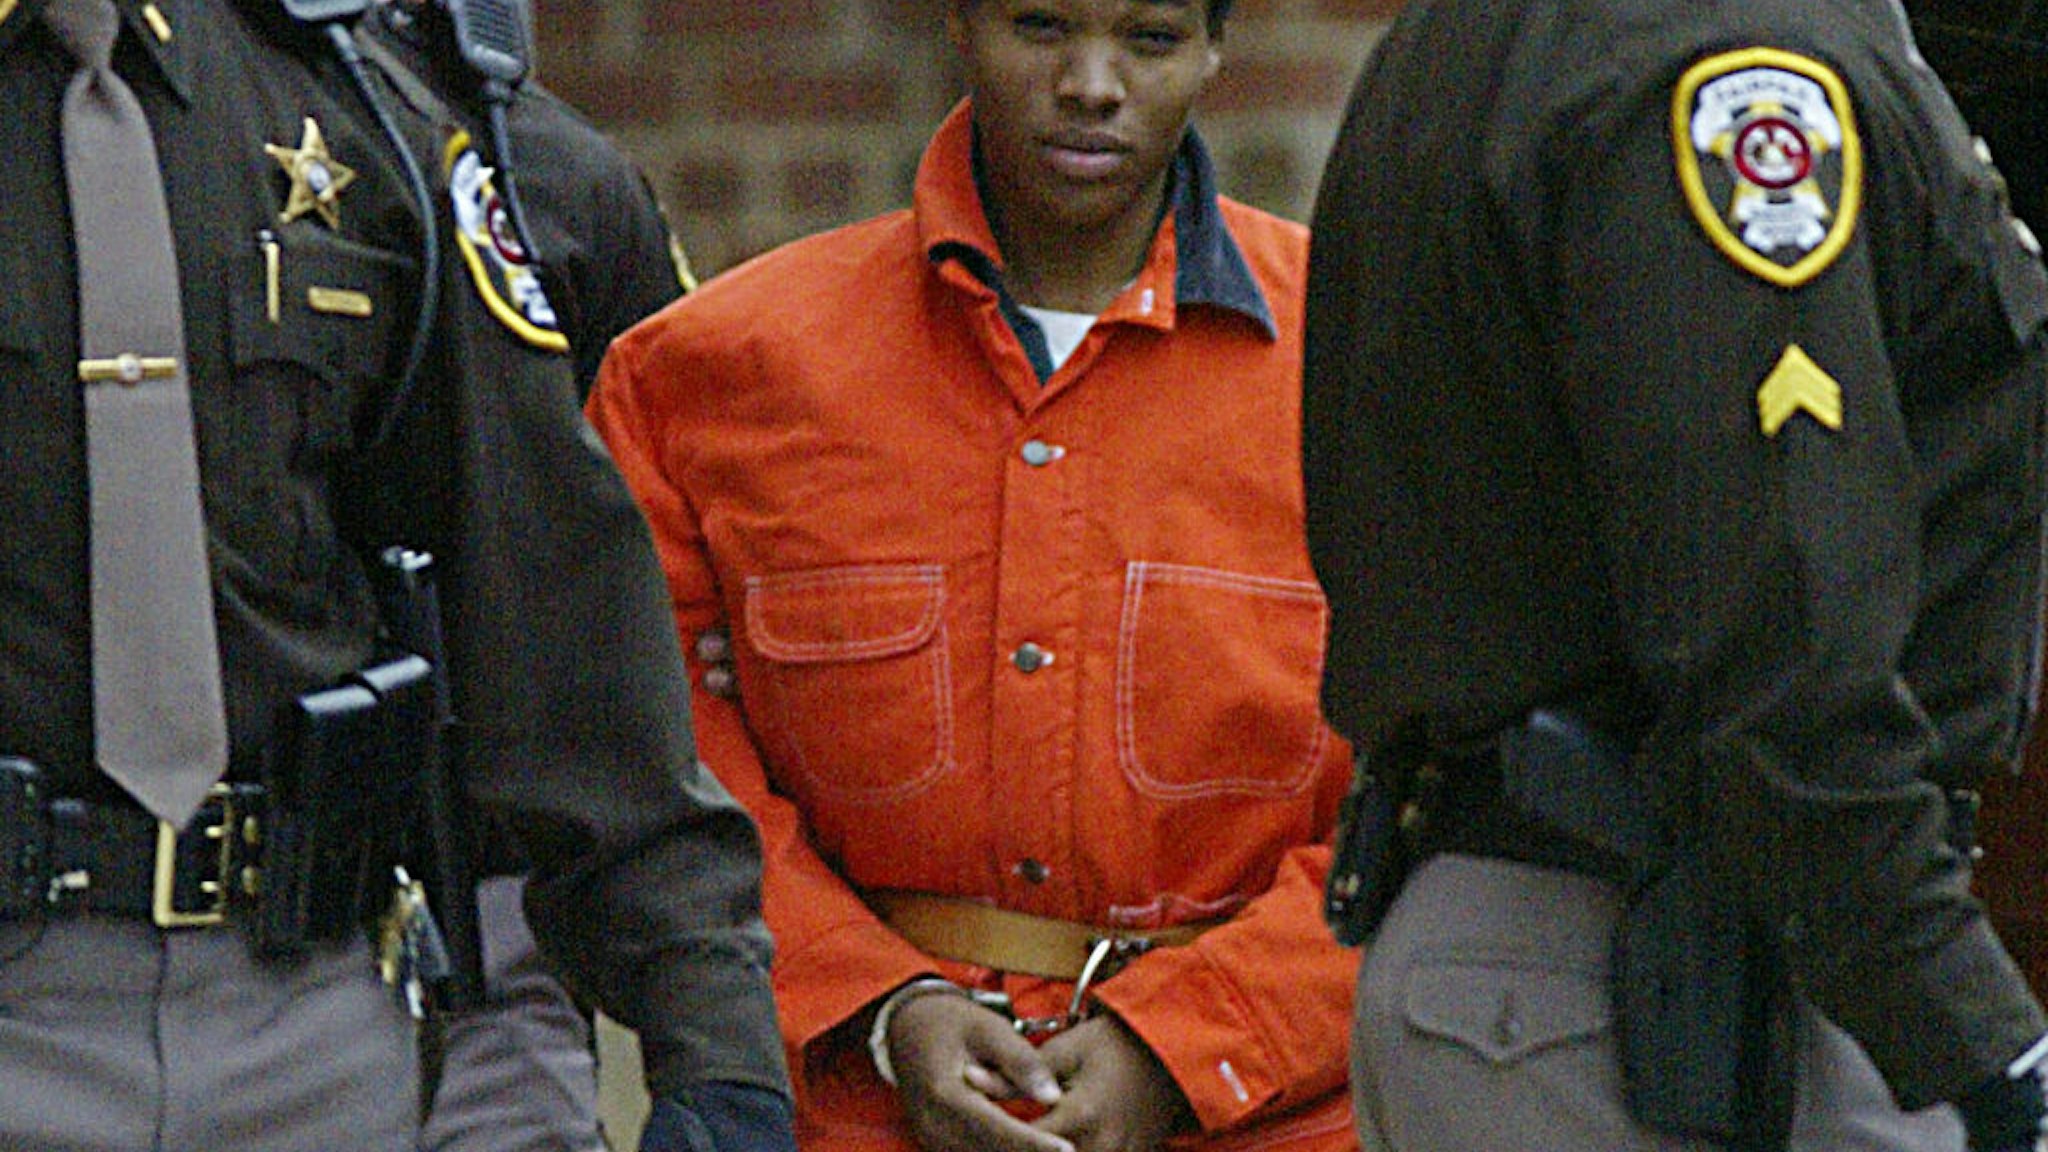 Sniper suspect Lee Malvo (c) leaves a pre-trial hearing at the Fairfax County Juvenile and Domestic Relations Court 04 December 2002 in Fairfax, Virginia.